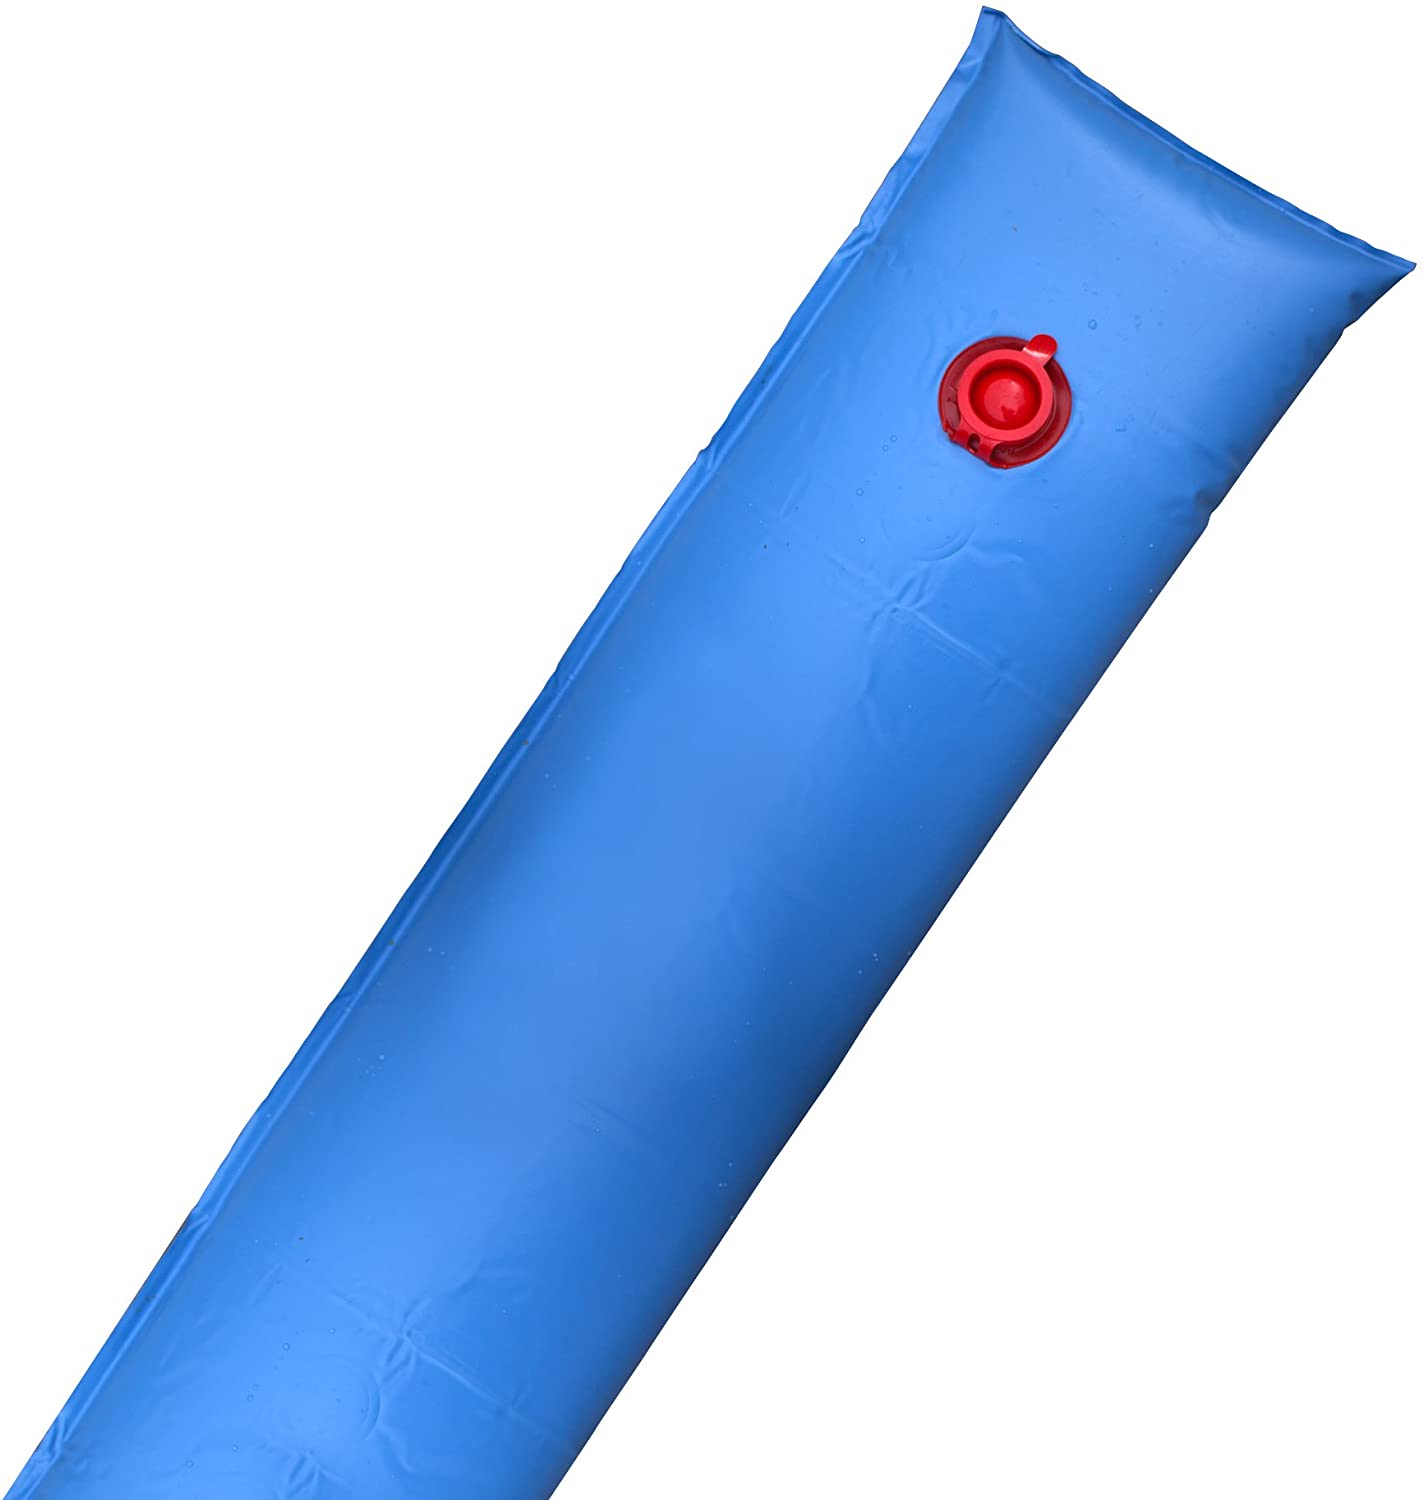 8FTSINGLE STD WATER TUBE-BLUE - TRADITIONAL WINTER COVERS